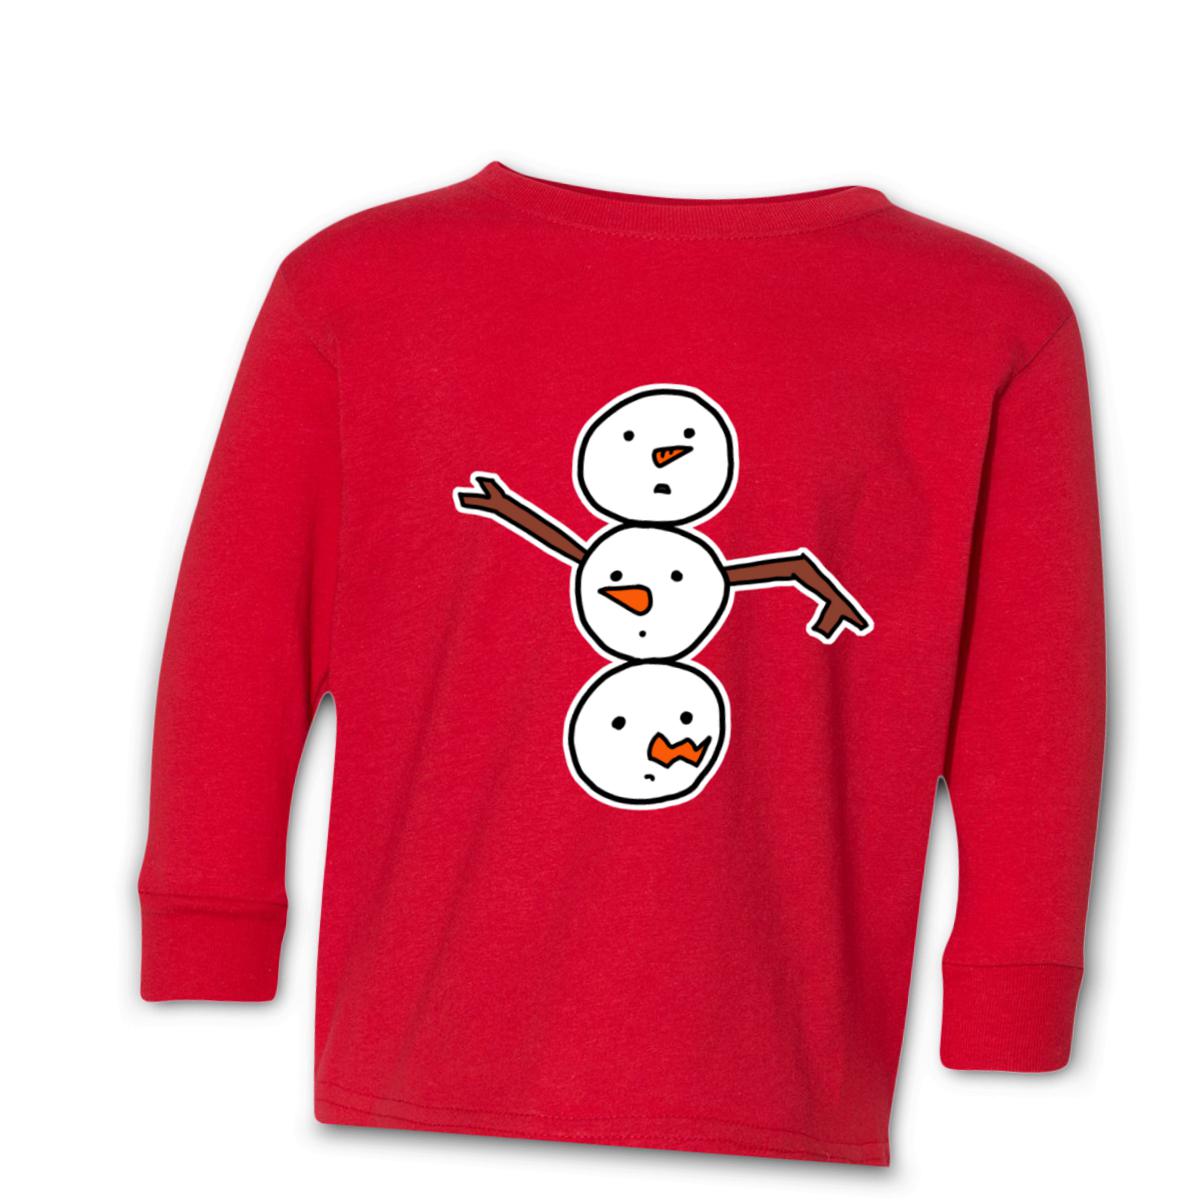 Snowman All Heads Toddler Long Sleeve Tee 56T red